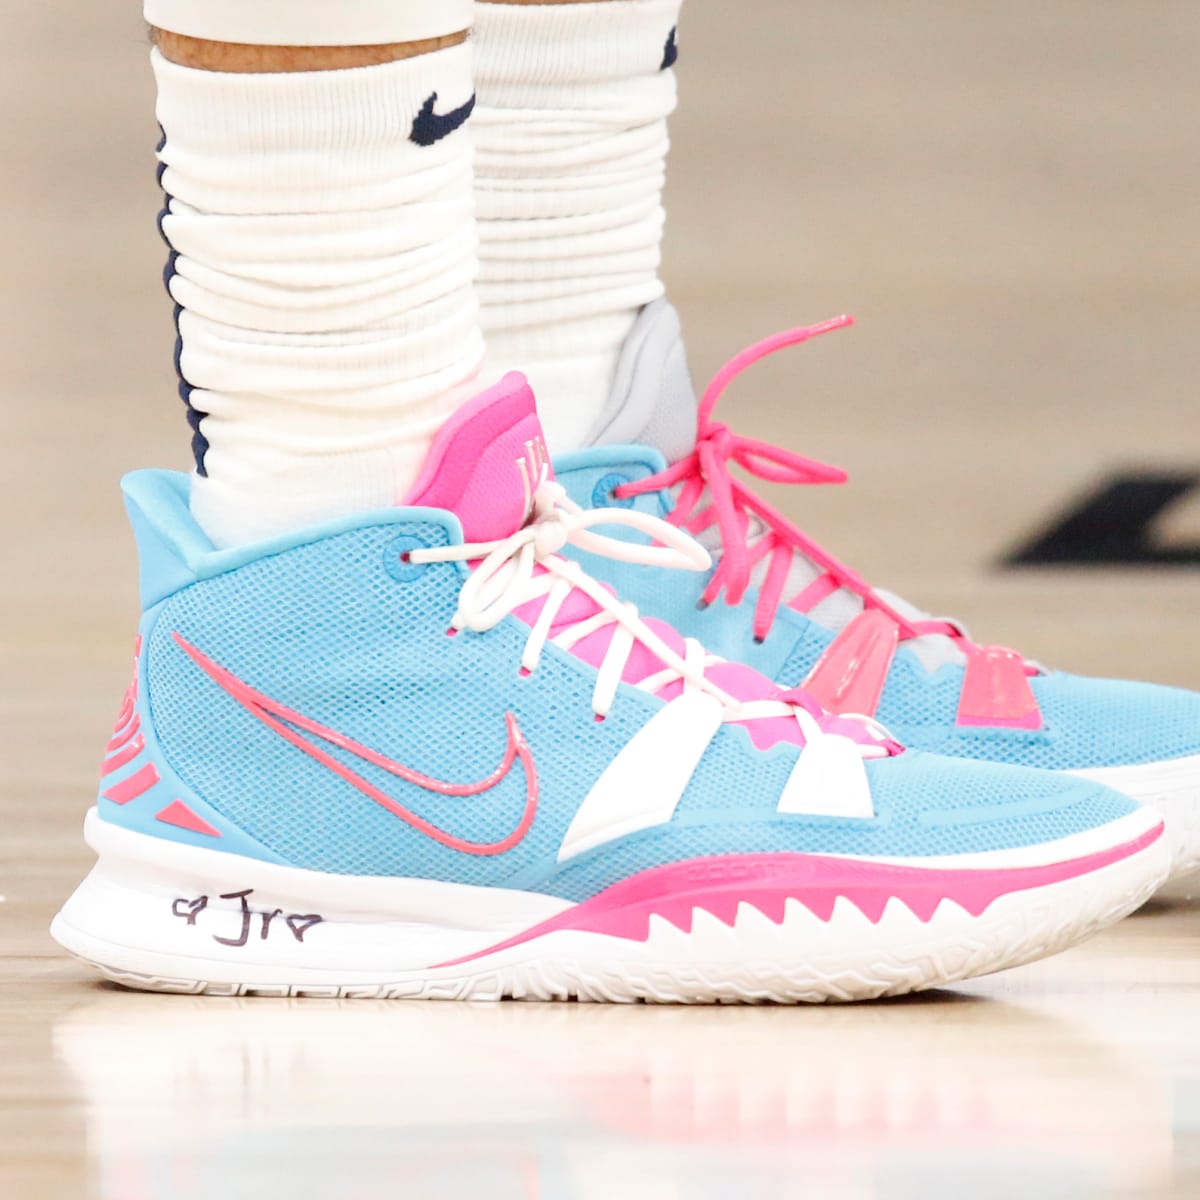 What Pros Wear: Jayson Tatum's Nike Kyrie 5 Shoes - What Pros Wear